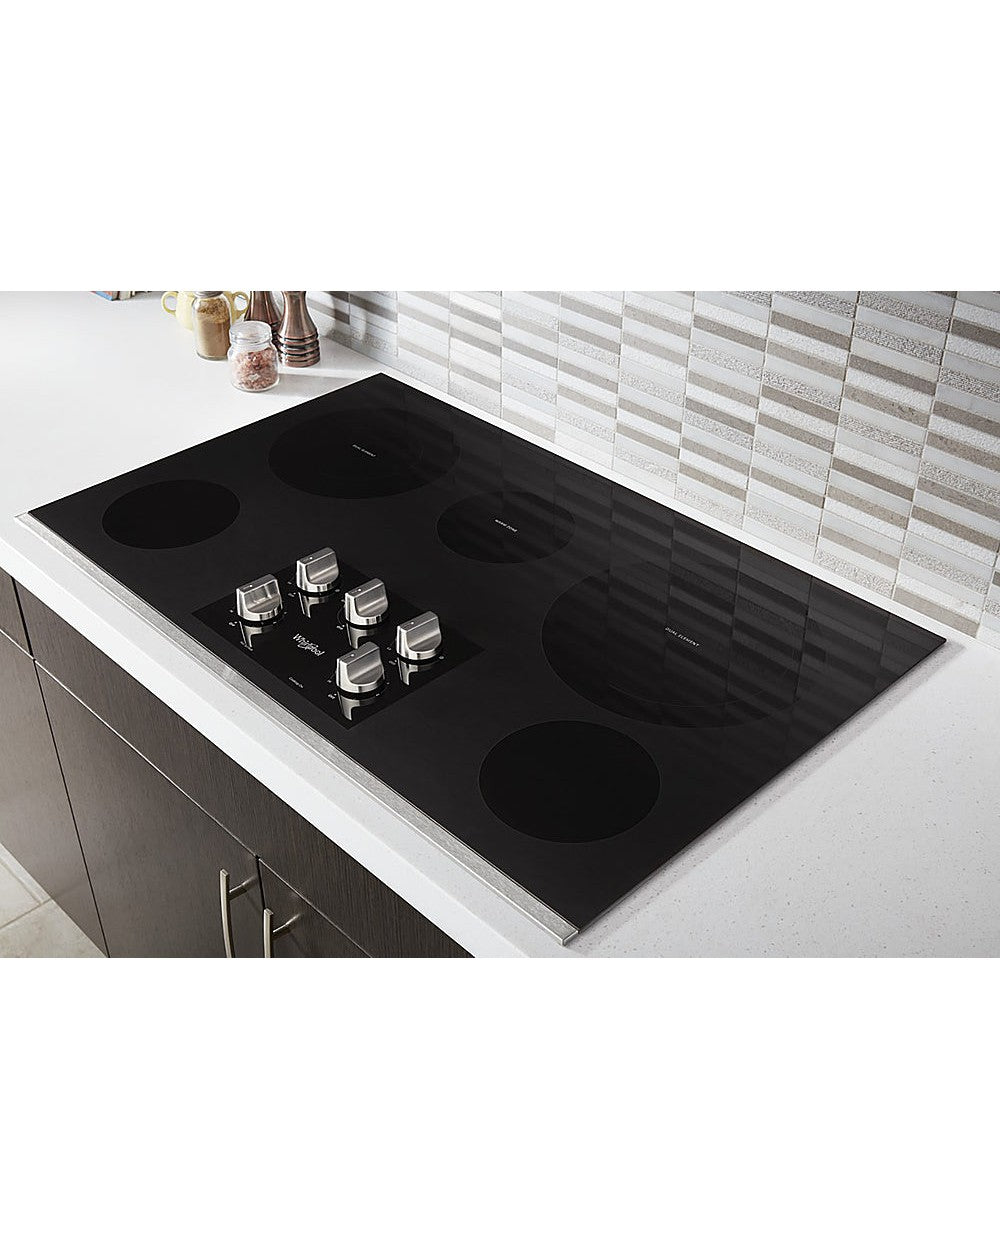 WHIRLPOOL WCE77US6HS 36-inch Electric Ceramic Glass Cooktop